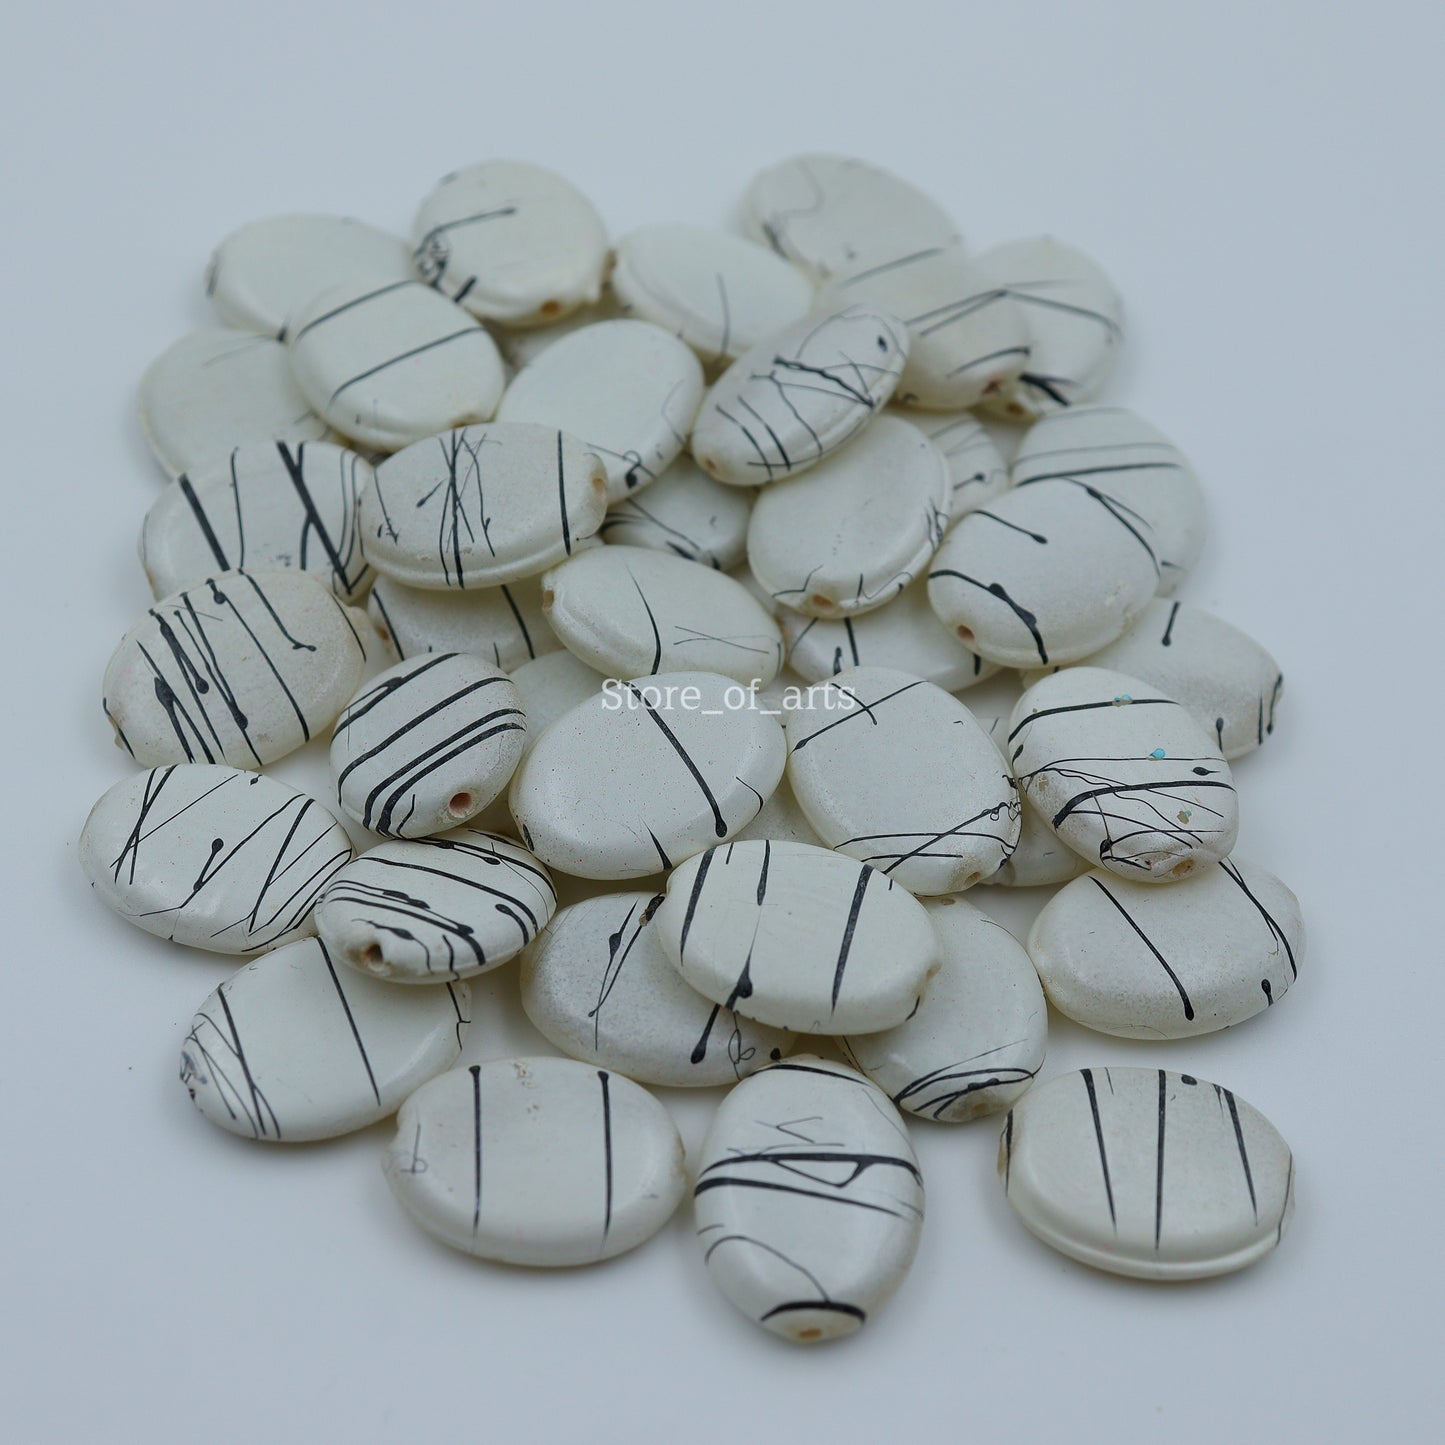 Flat beads for Jewelry Making and DIY Projects in Black and White Color, Pack of 25 pcs